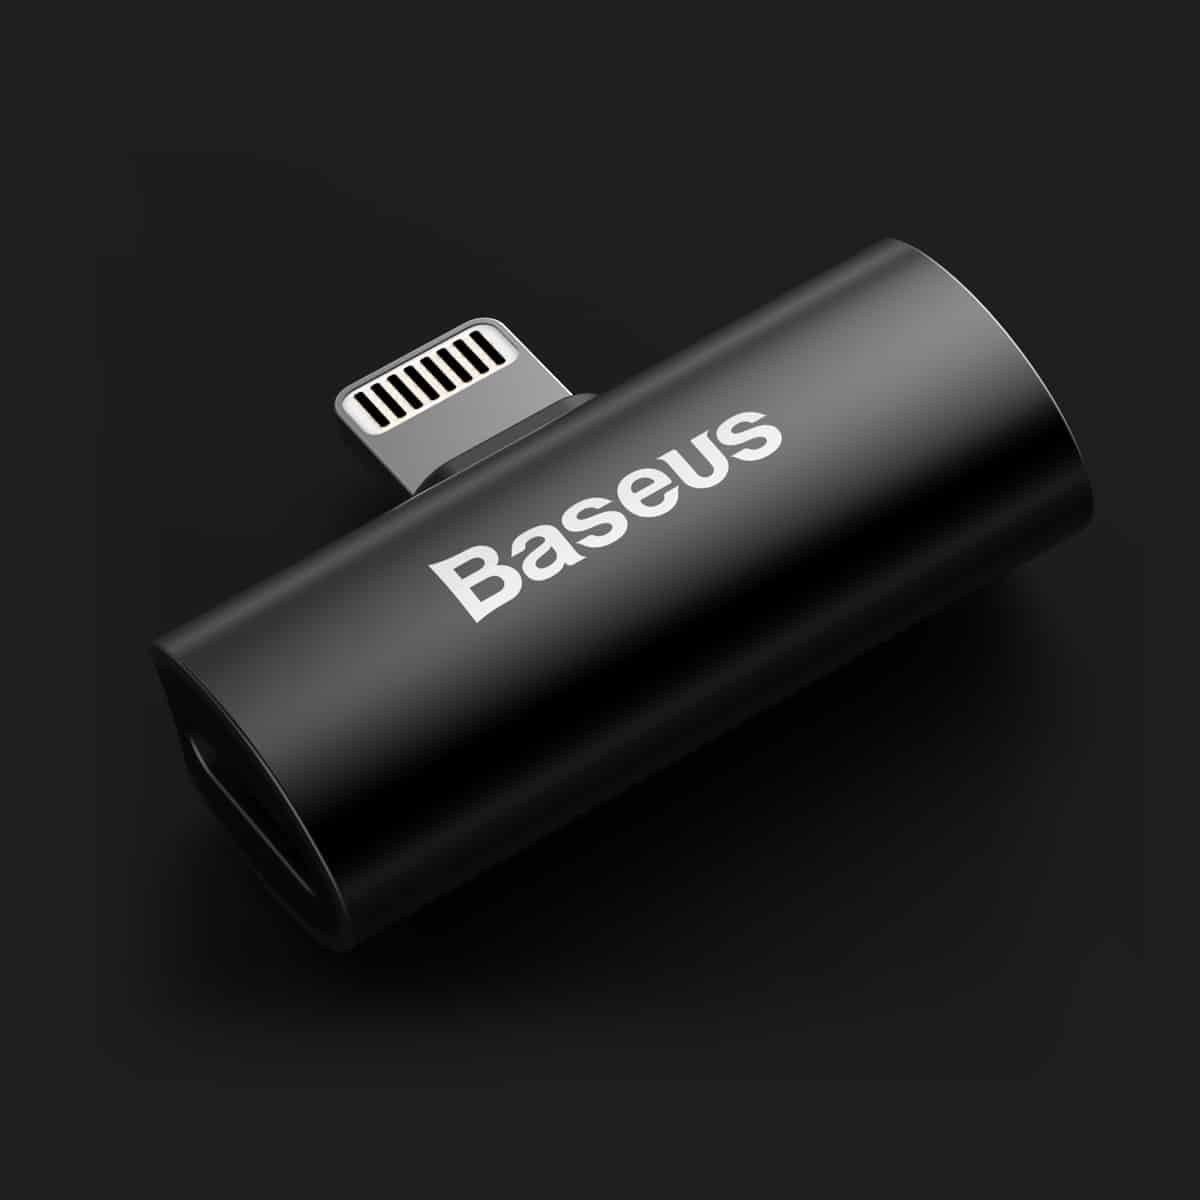 Baseus - L46 iPhone lightning Male to Dual iPhone lightning Female Adapters